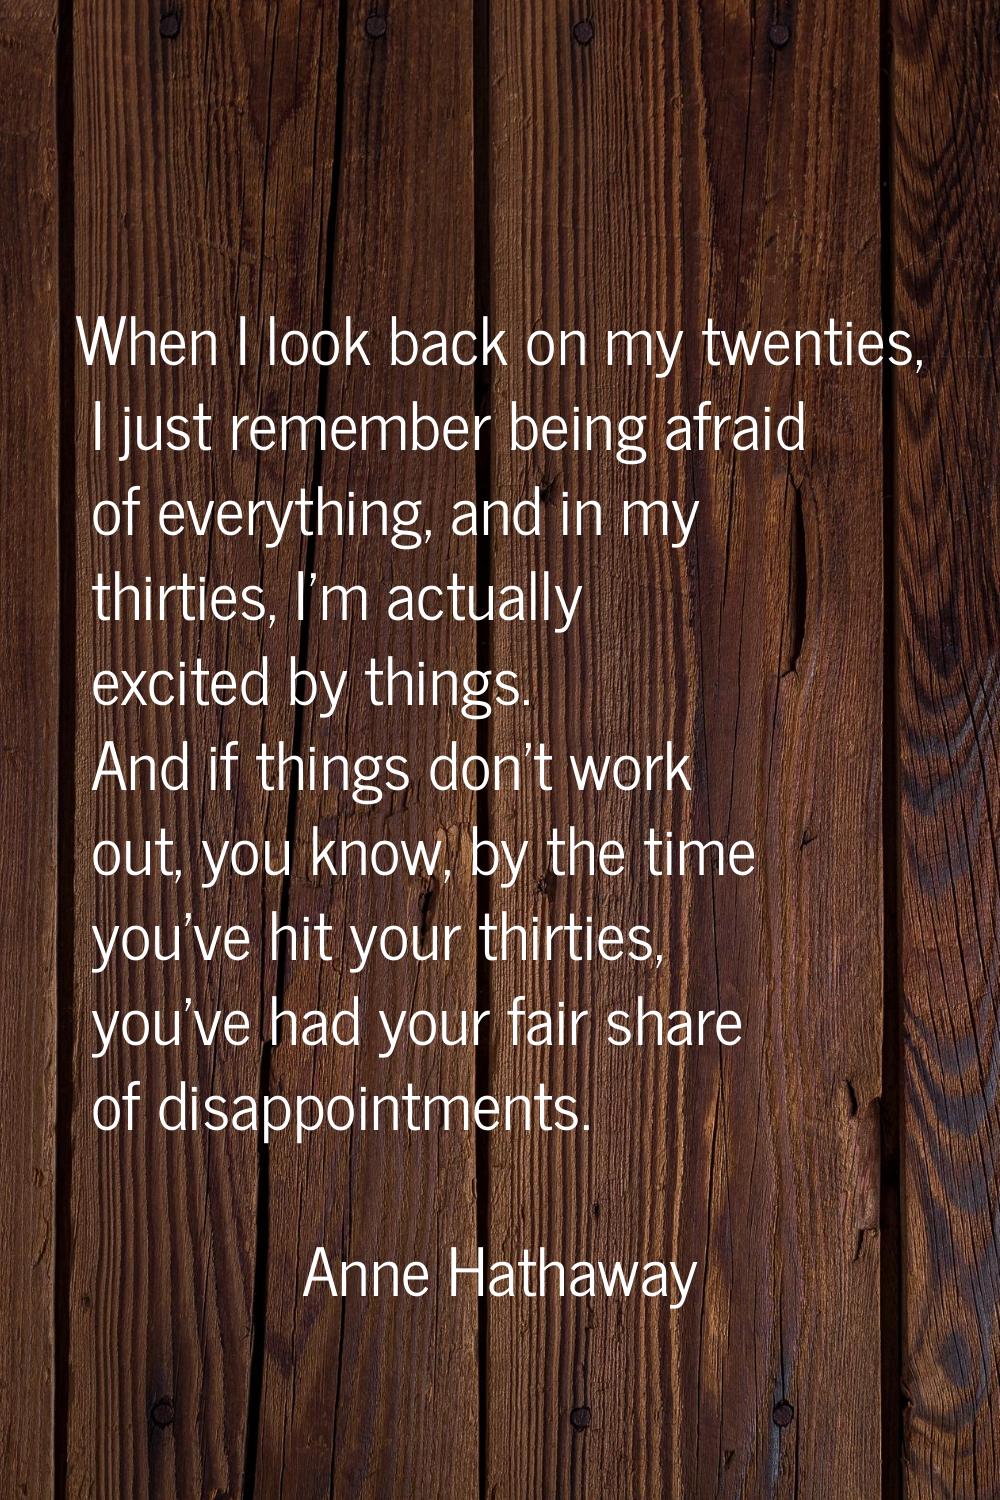 When I look back on my twenties, I just remember being afraid of everything, and in my thirties, I'